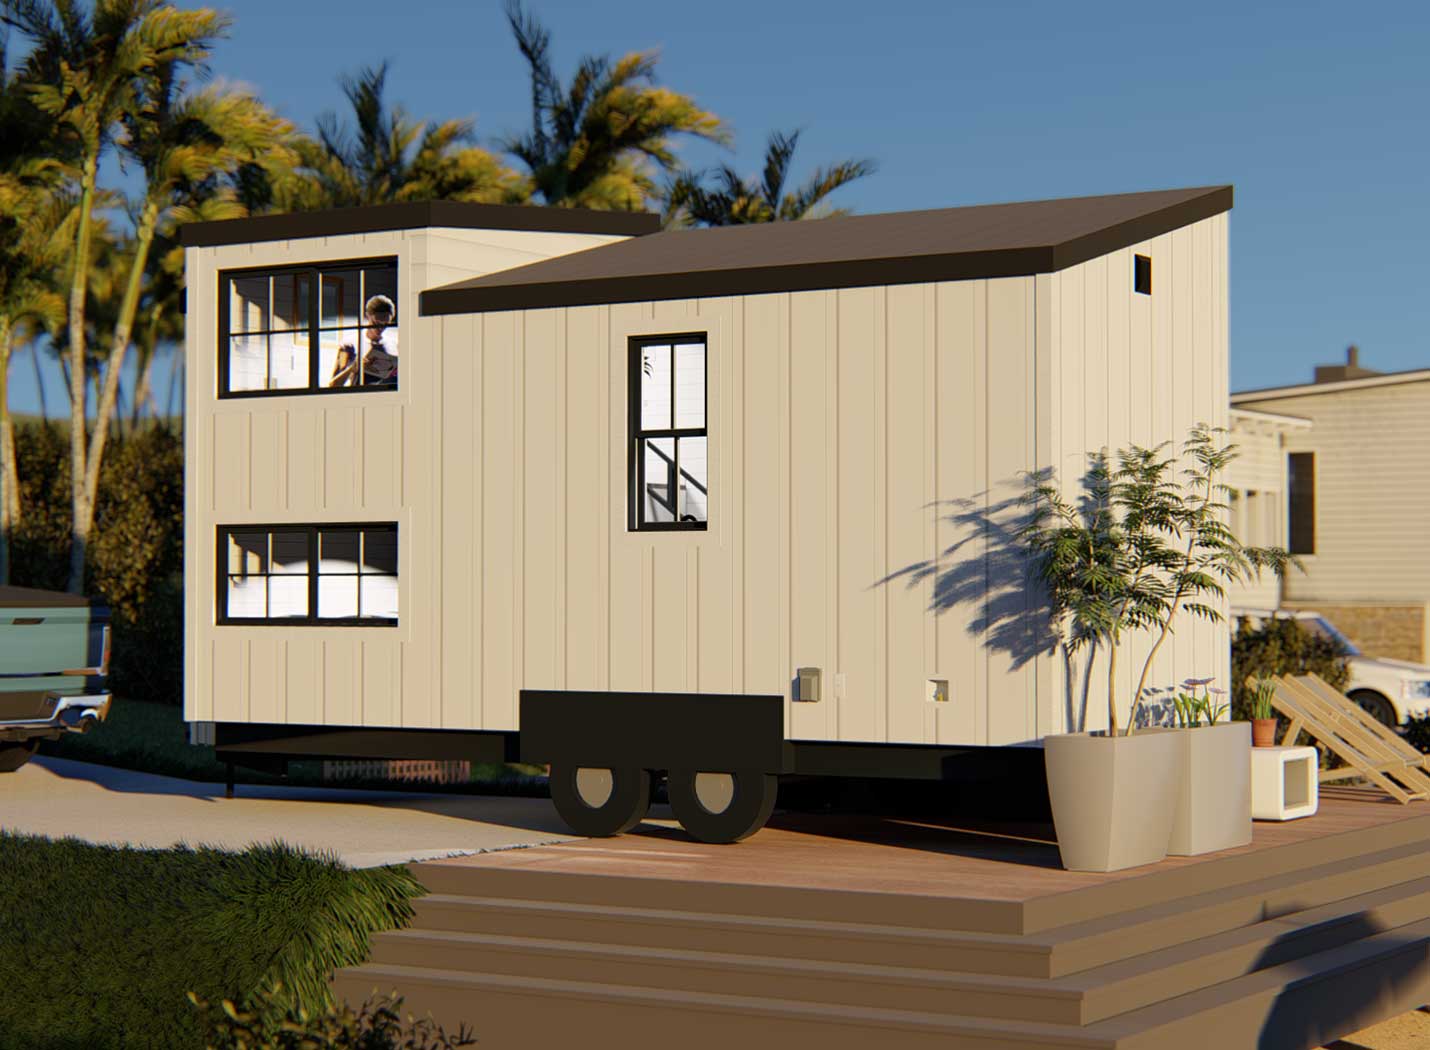 Keepsake tiny home 3D model in farmhouse style, view of the outside of the tiny house model